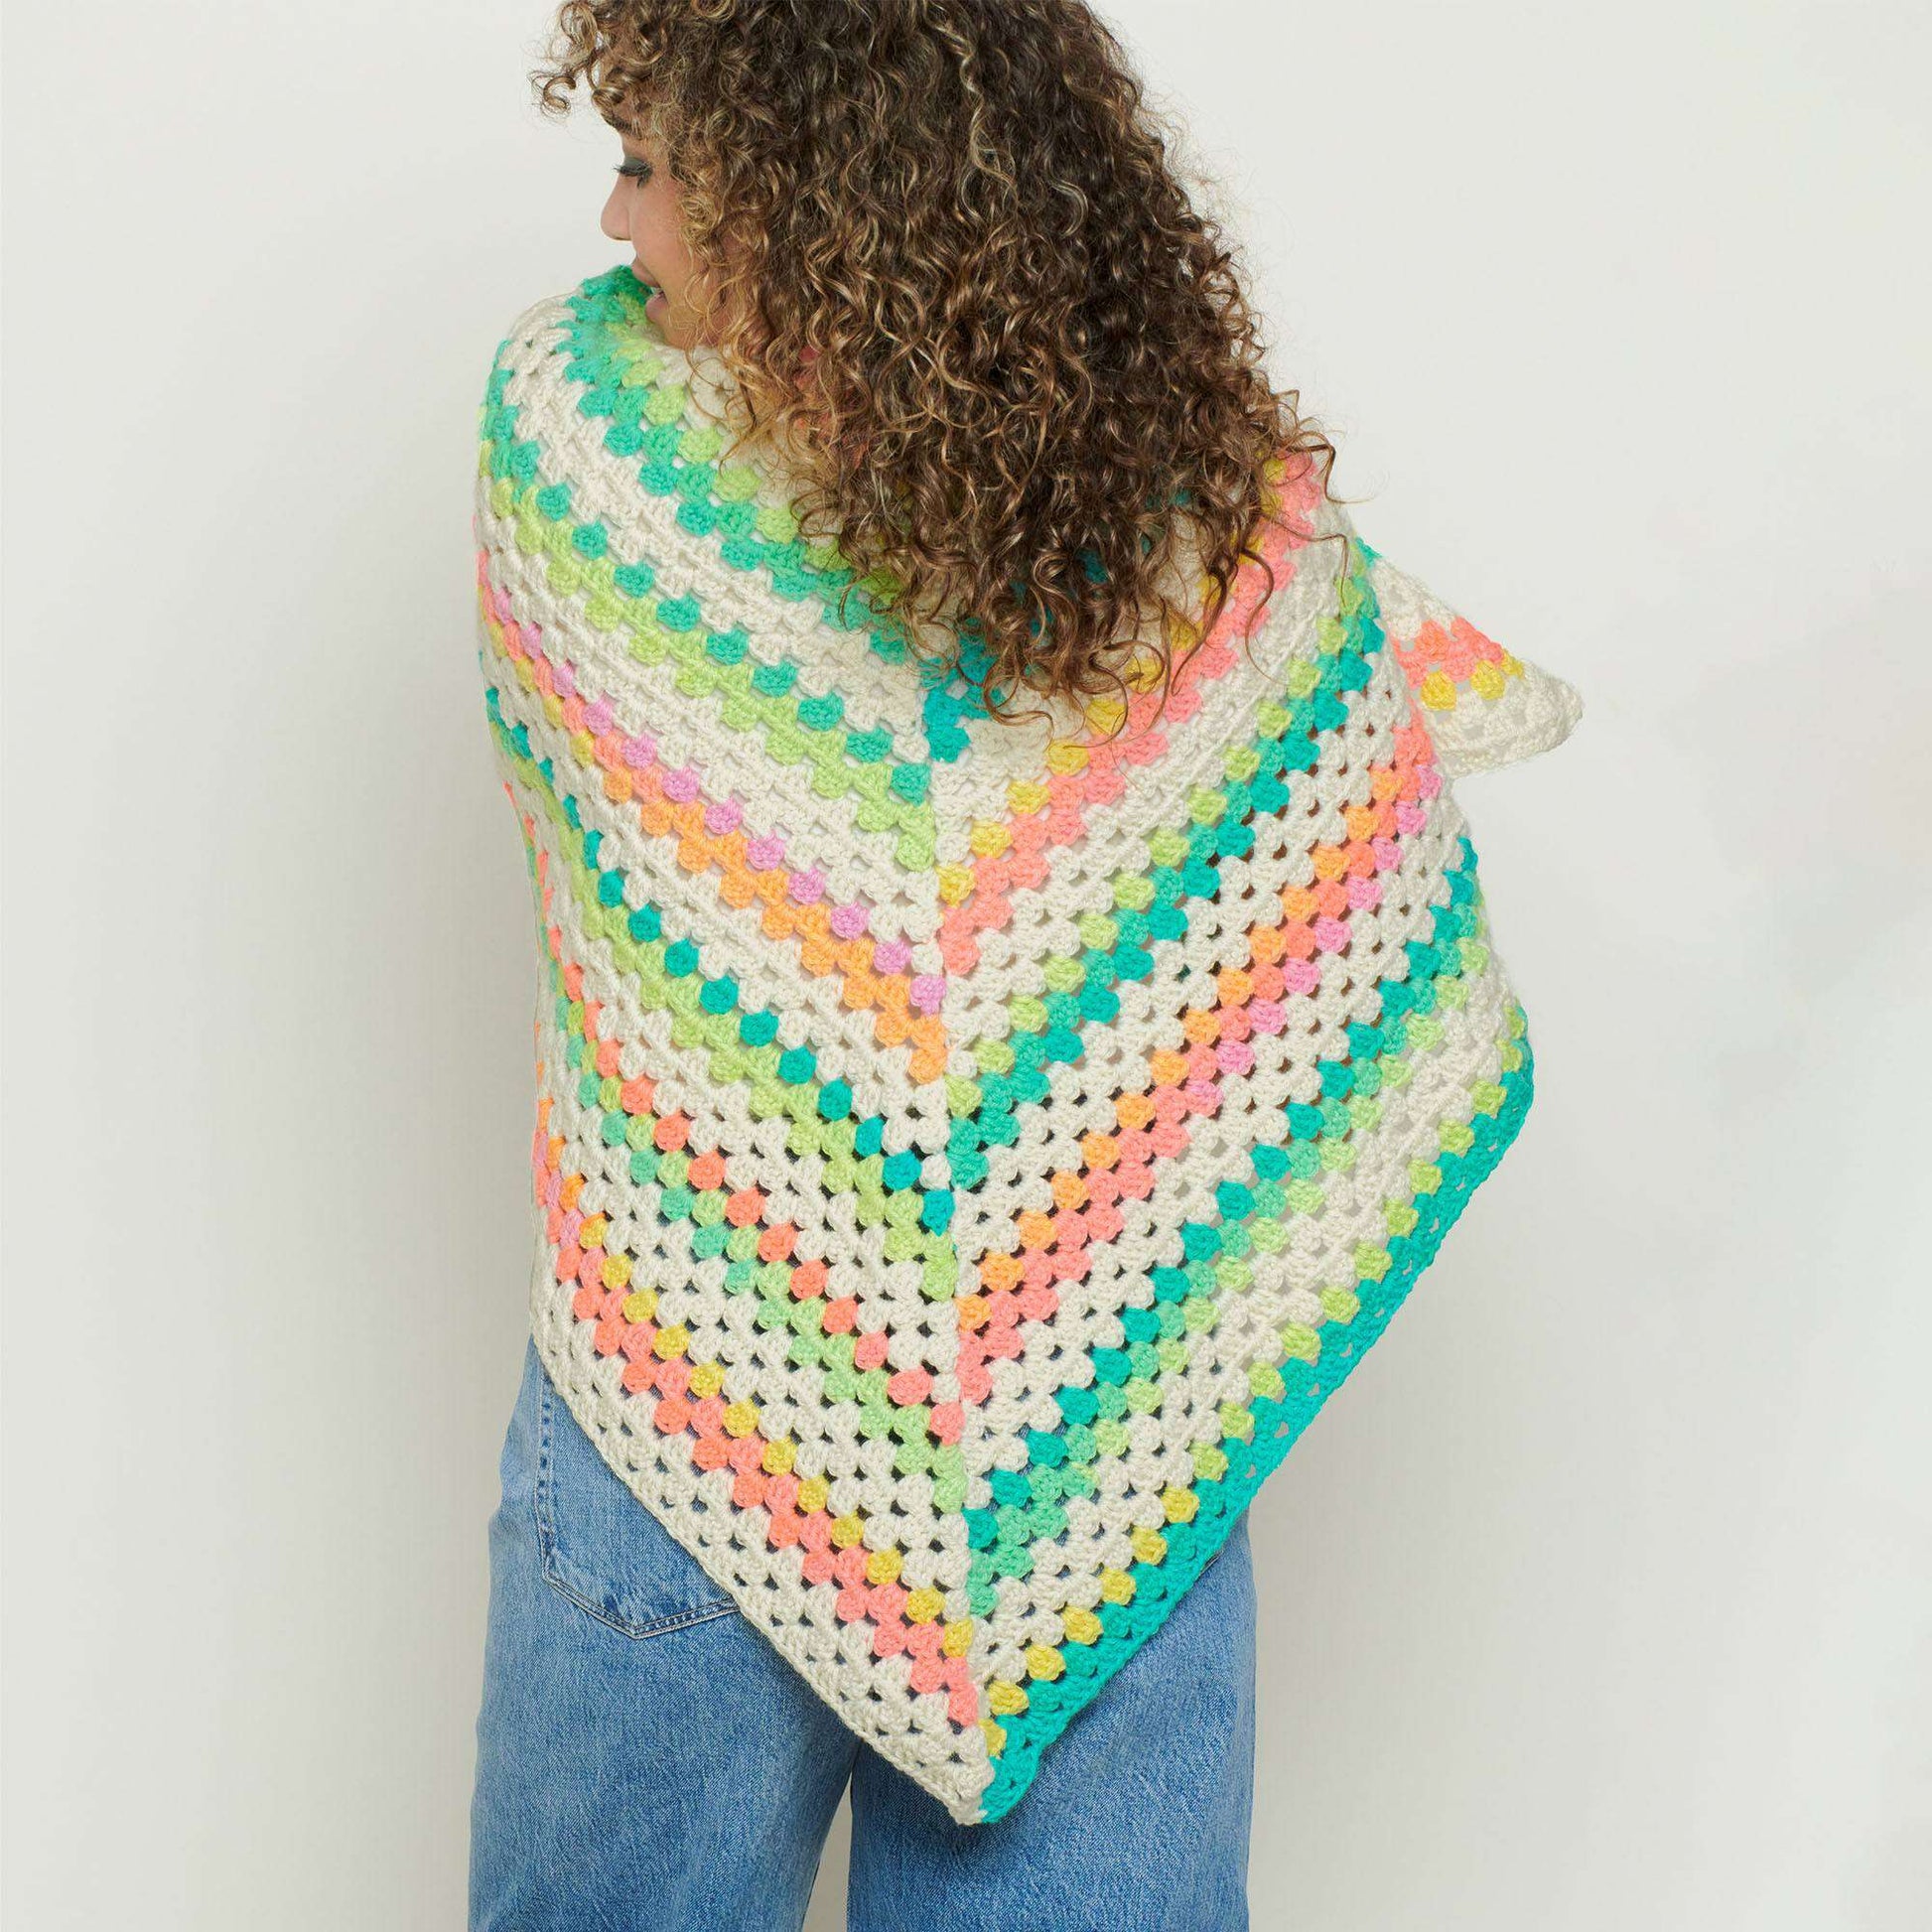 Free Red Heart Staggered Stripes Crochet Shawl Pattern